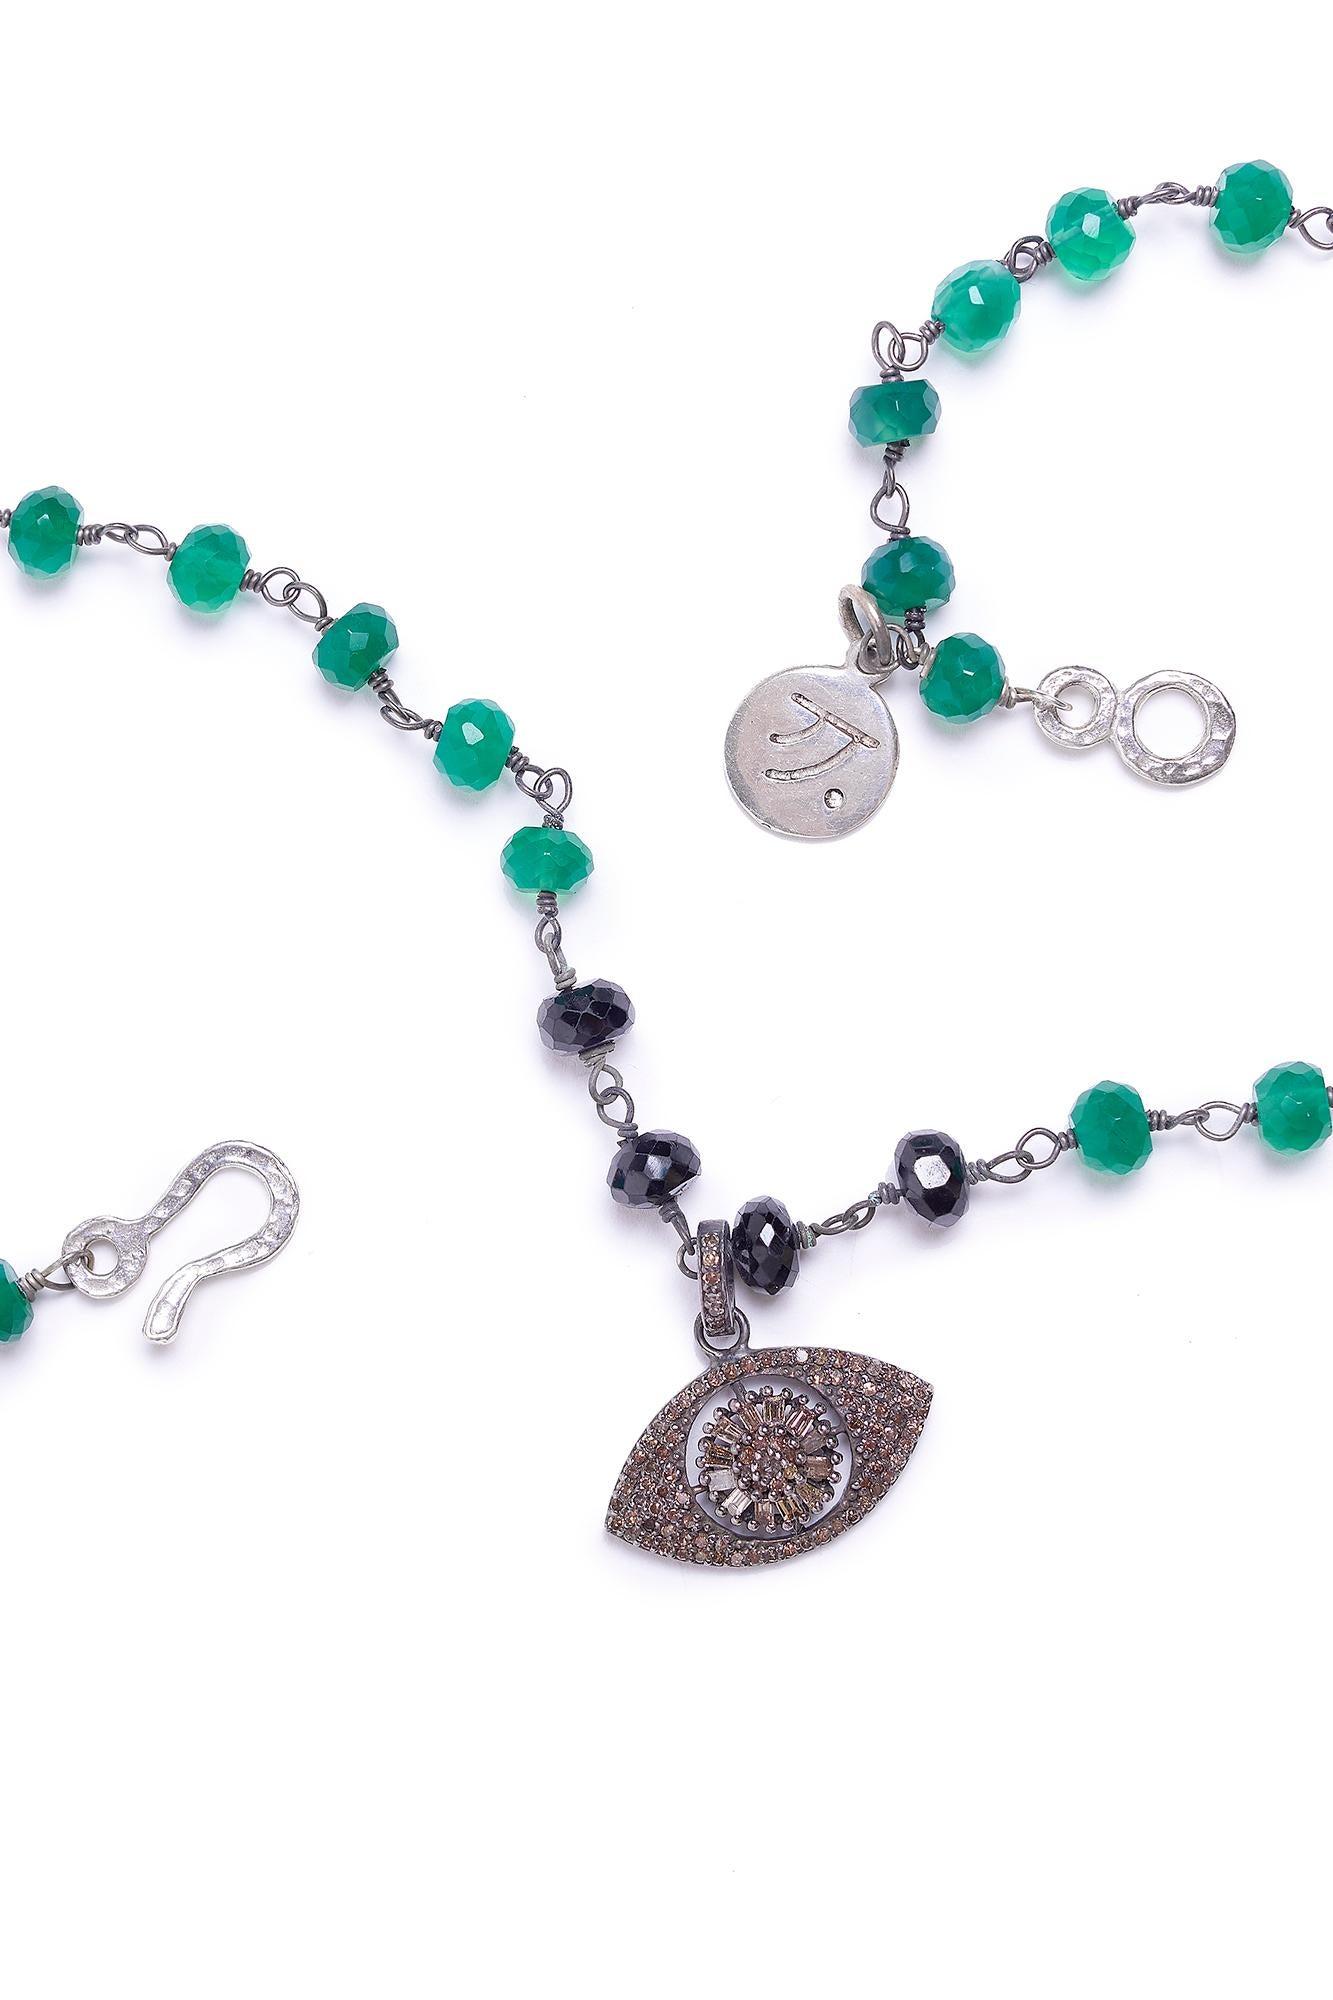 Properties
Evil Eye is a prominent symbol in the Moroccan culture. The necklace is adorned with rich deep green onyx stones.  The necklace is accented with a brilliant pave diamond evil eye.

Materials
Green Onyx, Black Onyx, Pavé Diamonds, Sterling